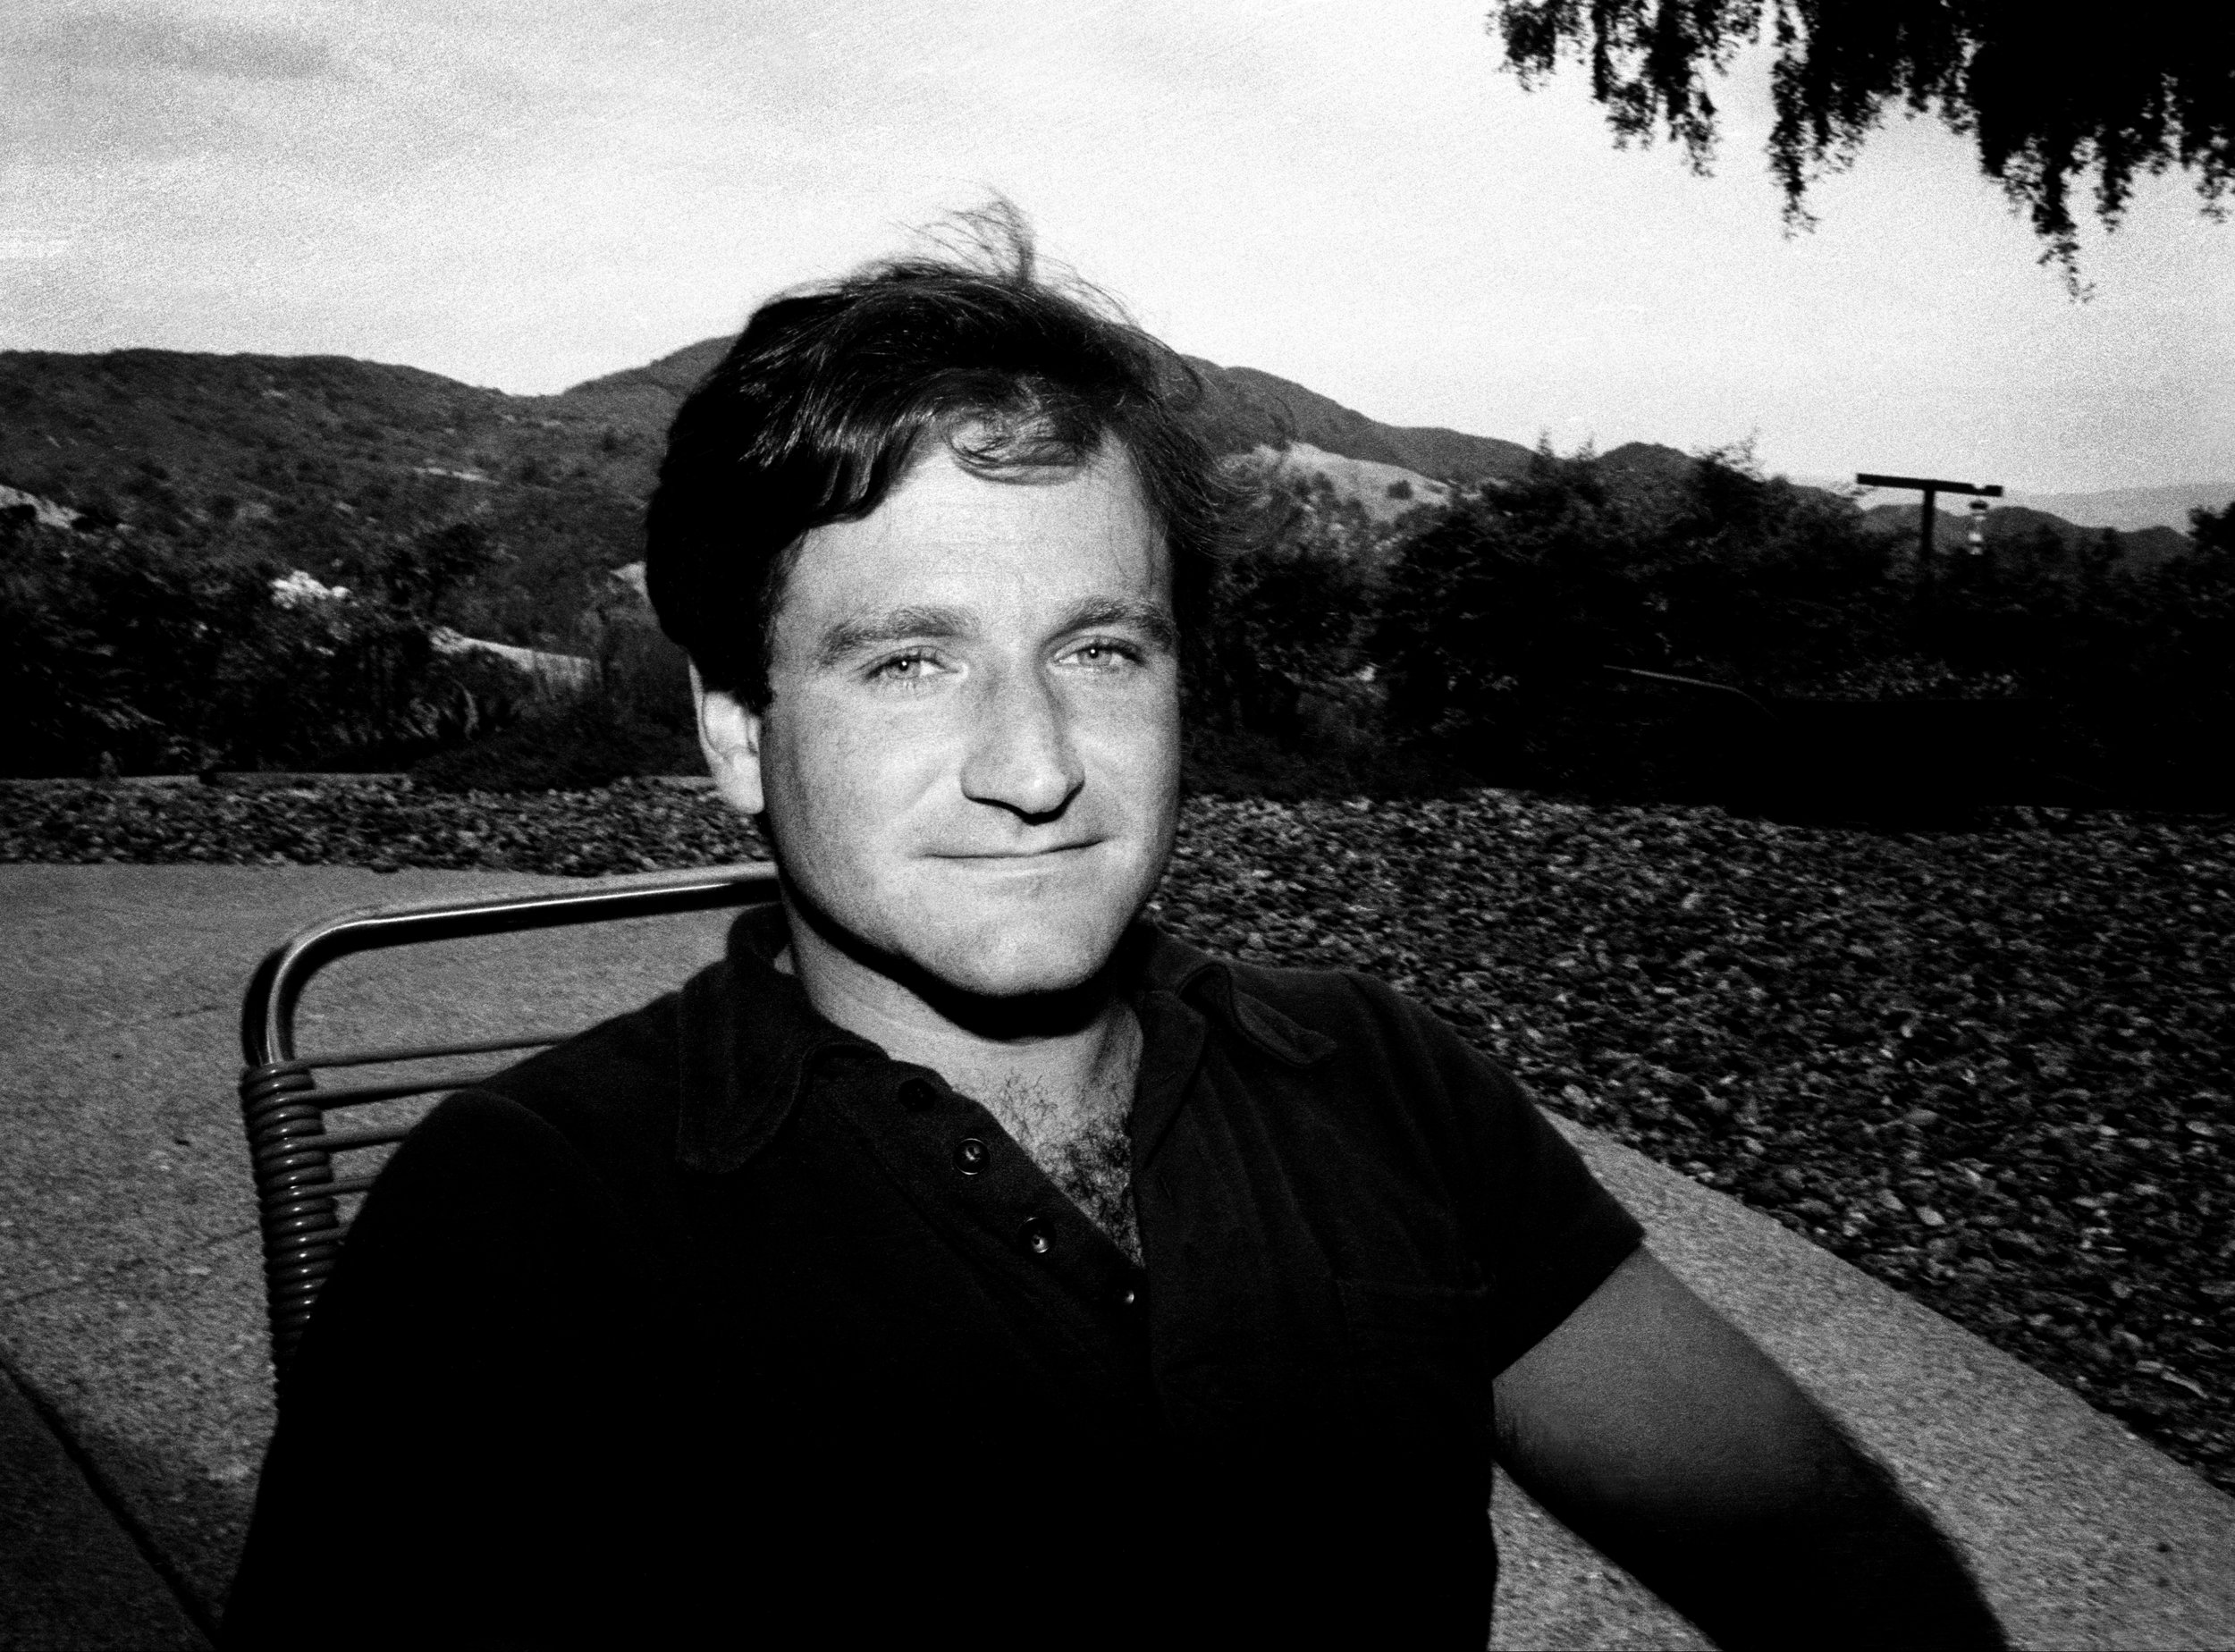  Actor and comedian Robin Williams at his home in Napa Valley. 1982 